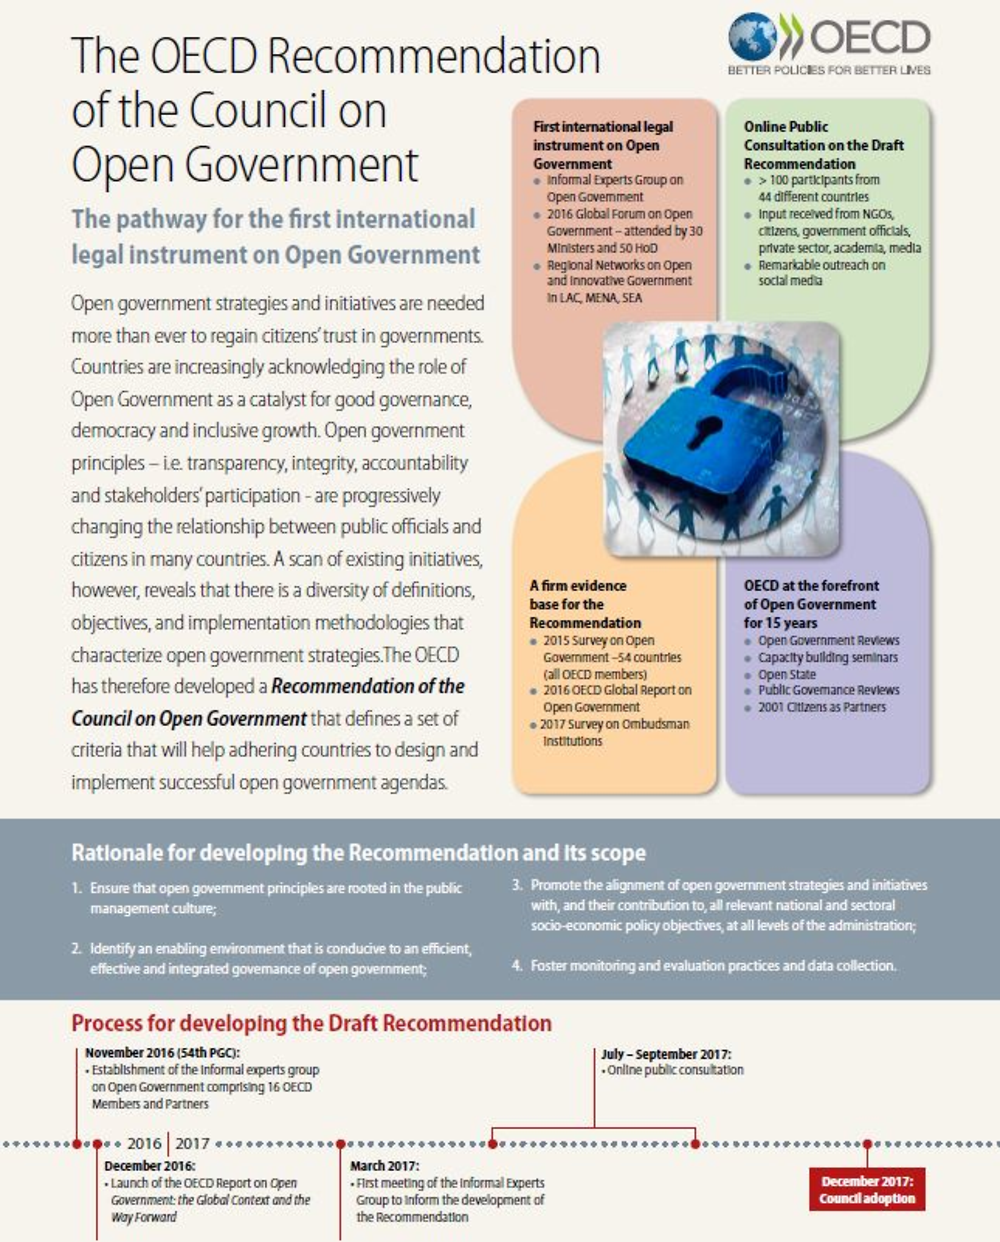 Figure ‎1.2. The 2017 OECD Recommendation of the Council on Open Government